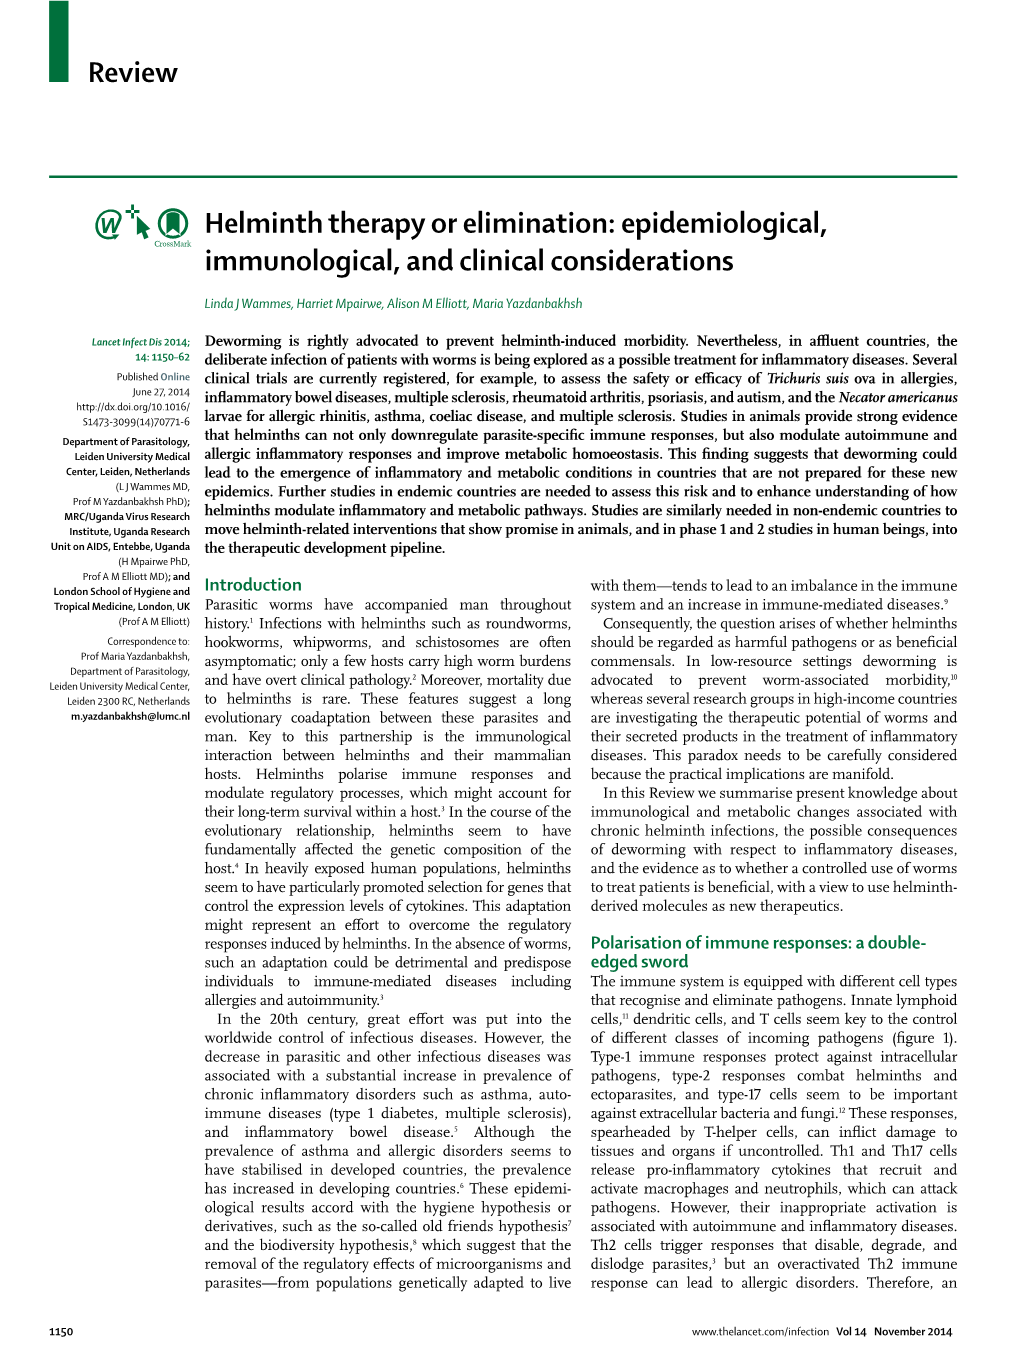 Helminth Therapy Or Elimination: Epidemiological, Immunological, and Clinical Considerations